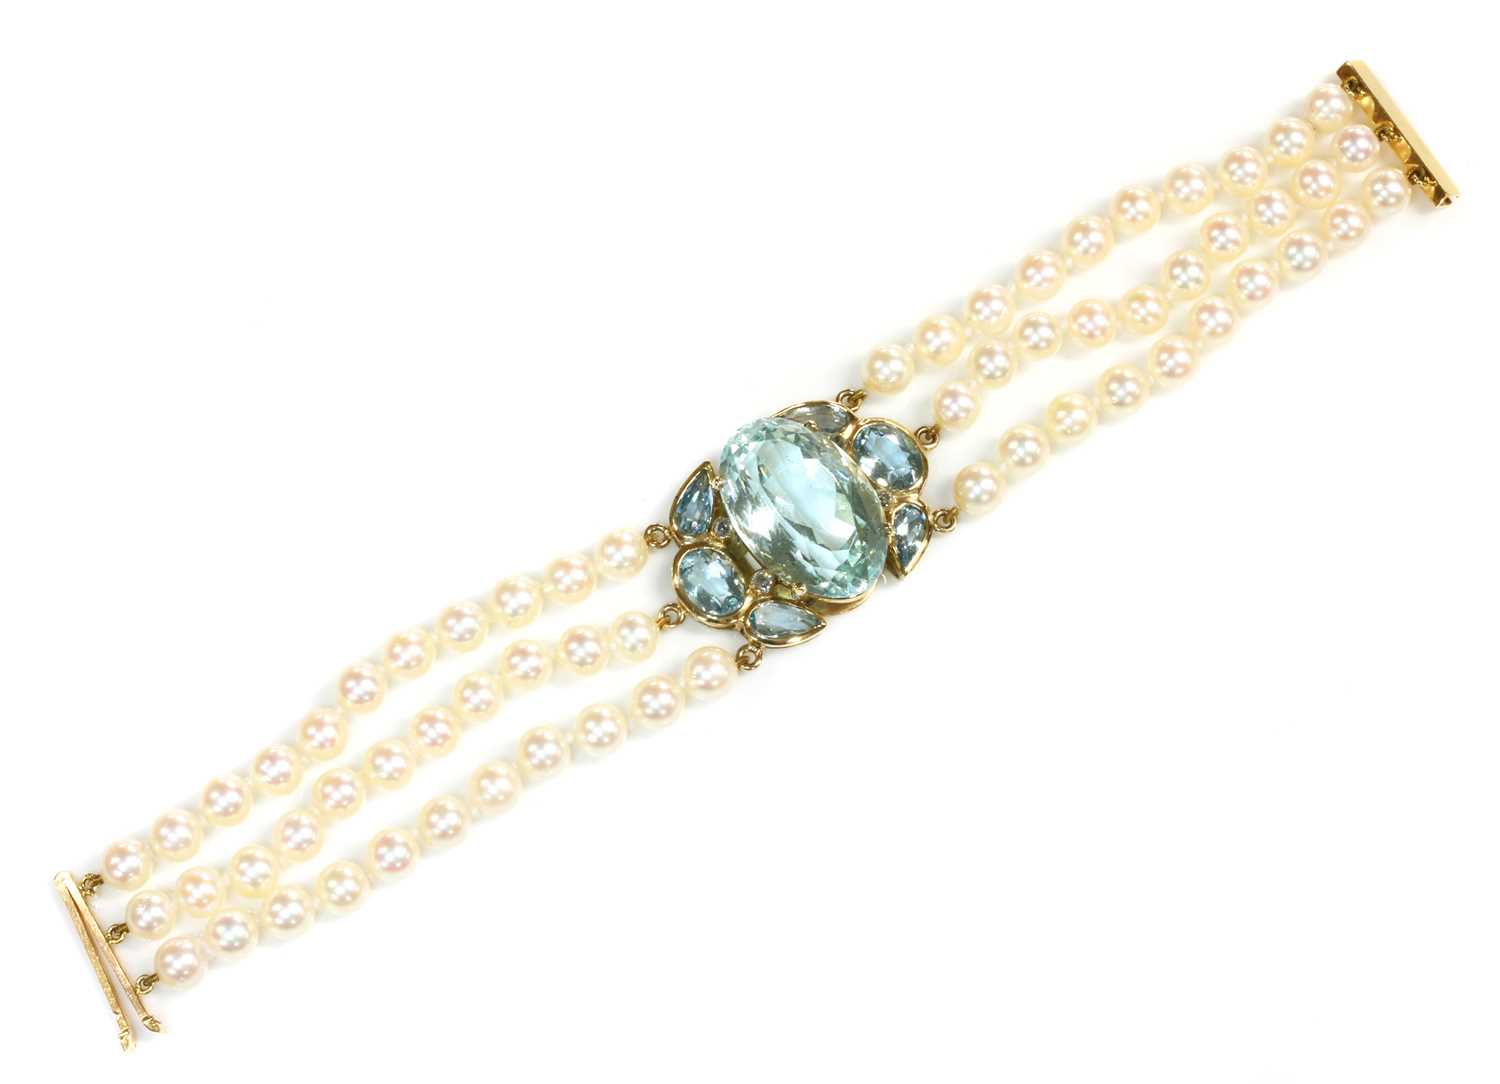 A 9ct gold aquamarine and cultured pearl bracelet, by Cassandra Goad, c.1998, - Image 2 of 4